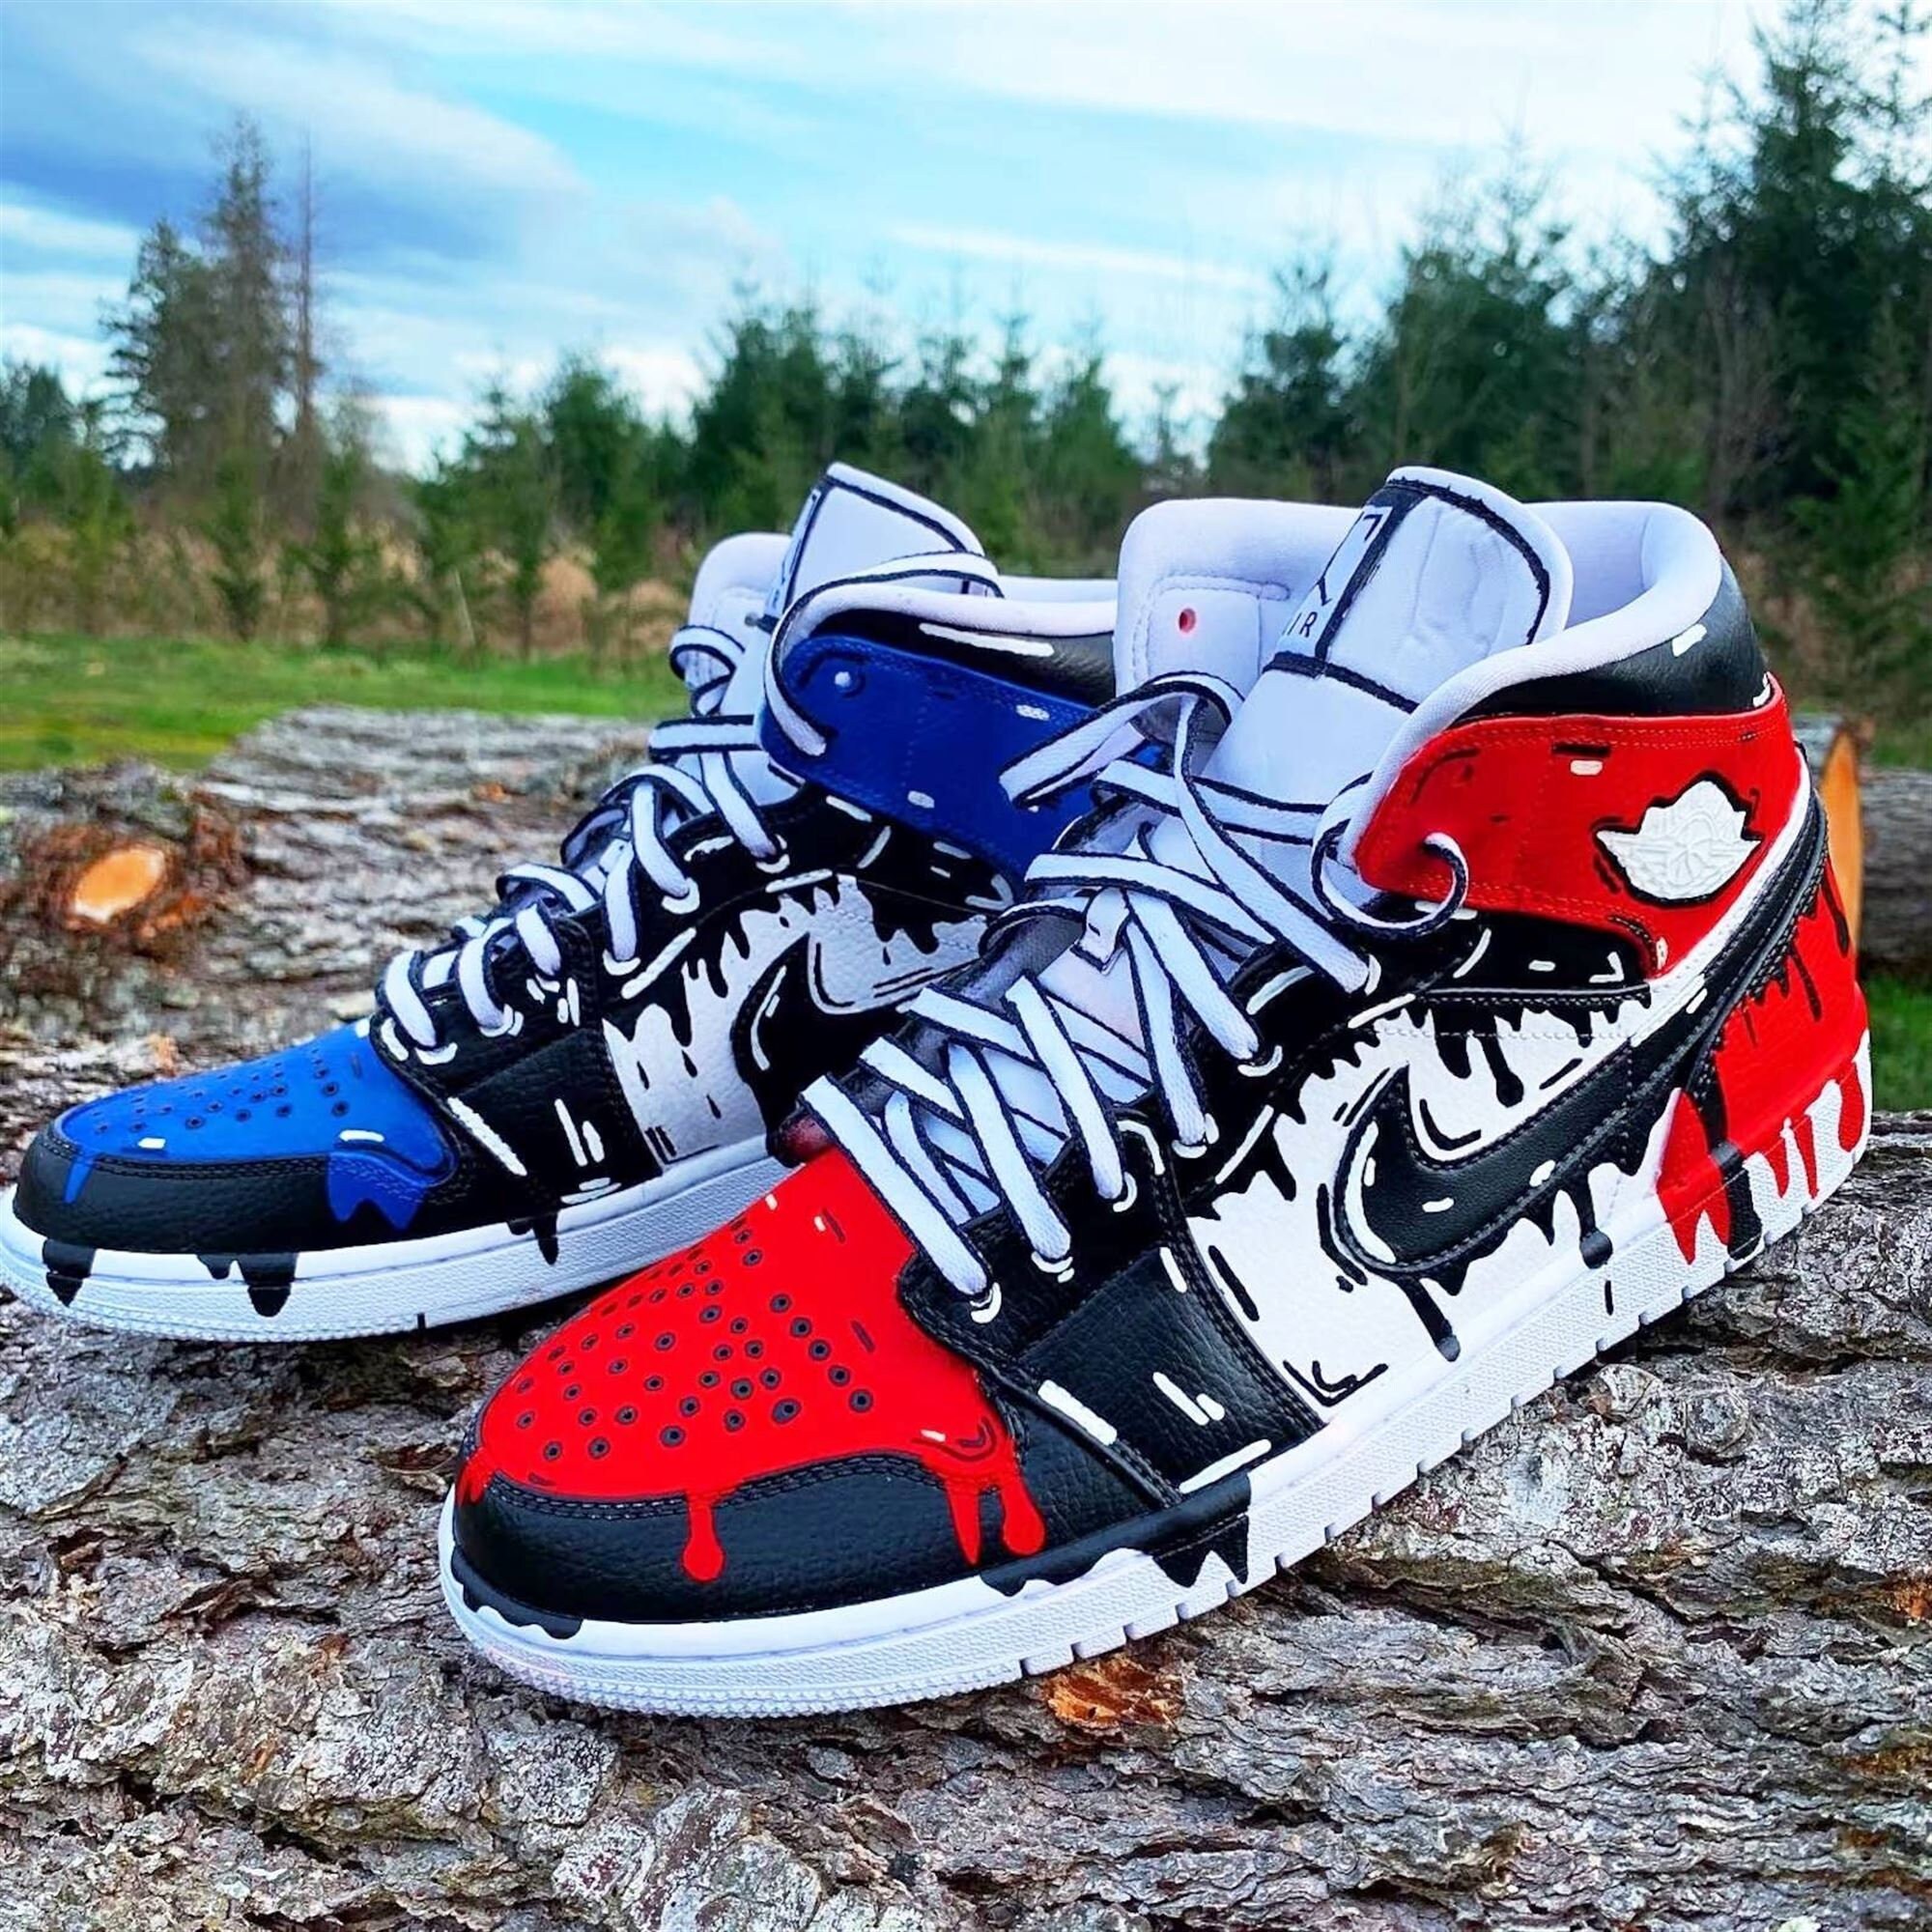 Light Blue and True Blue Drip with Splatter on Sole Custom Air